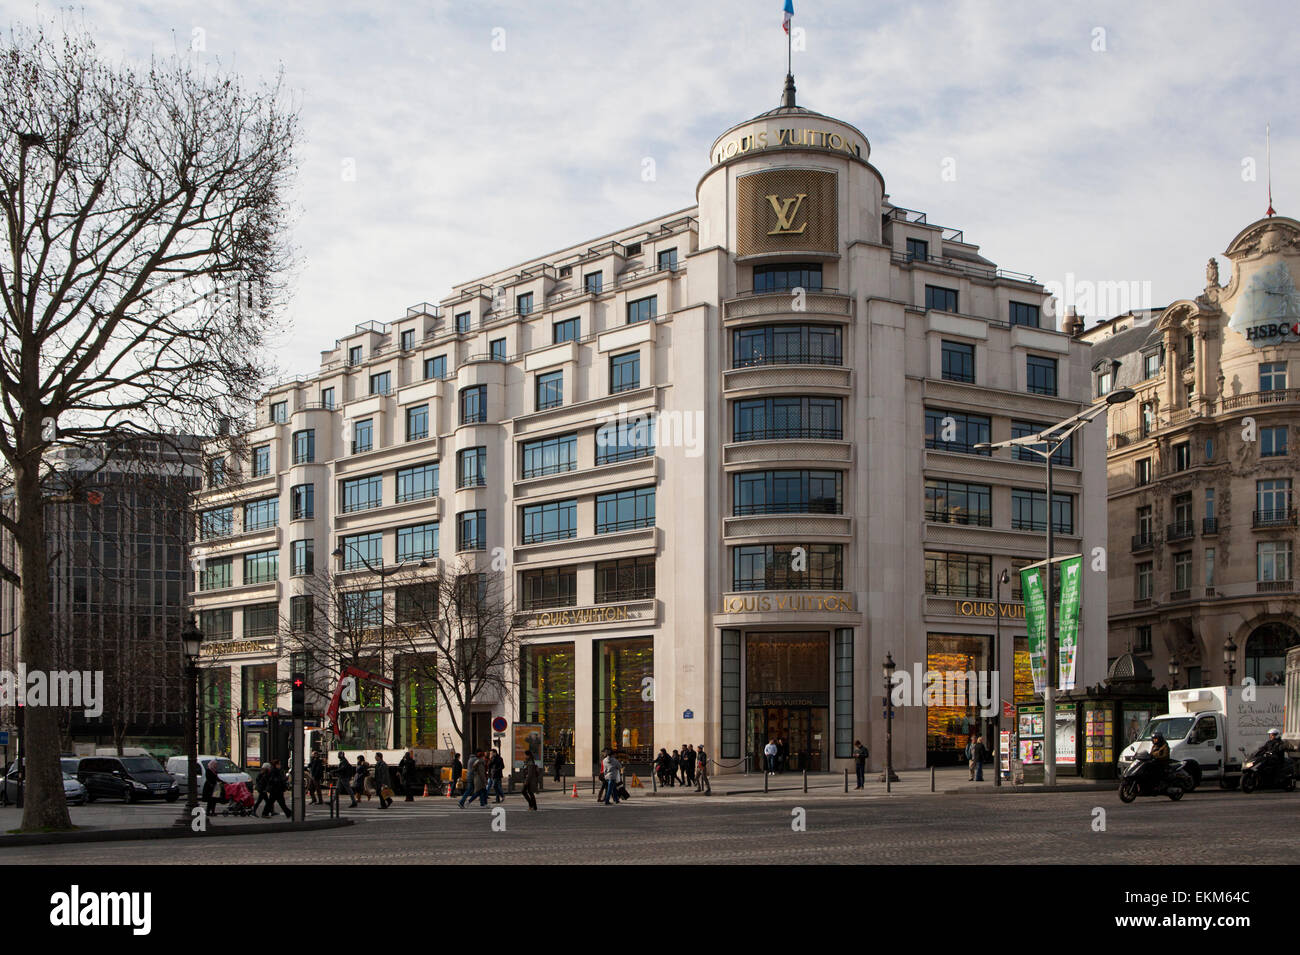 Louis Vuitton Opening Hours Champs Elysee | SEMA Data Co-op